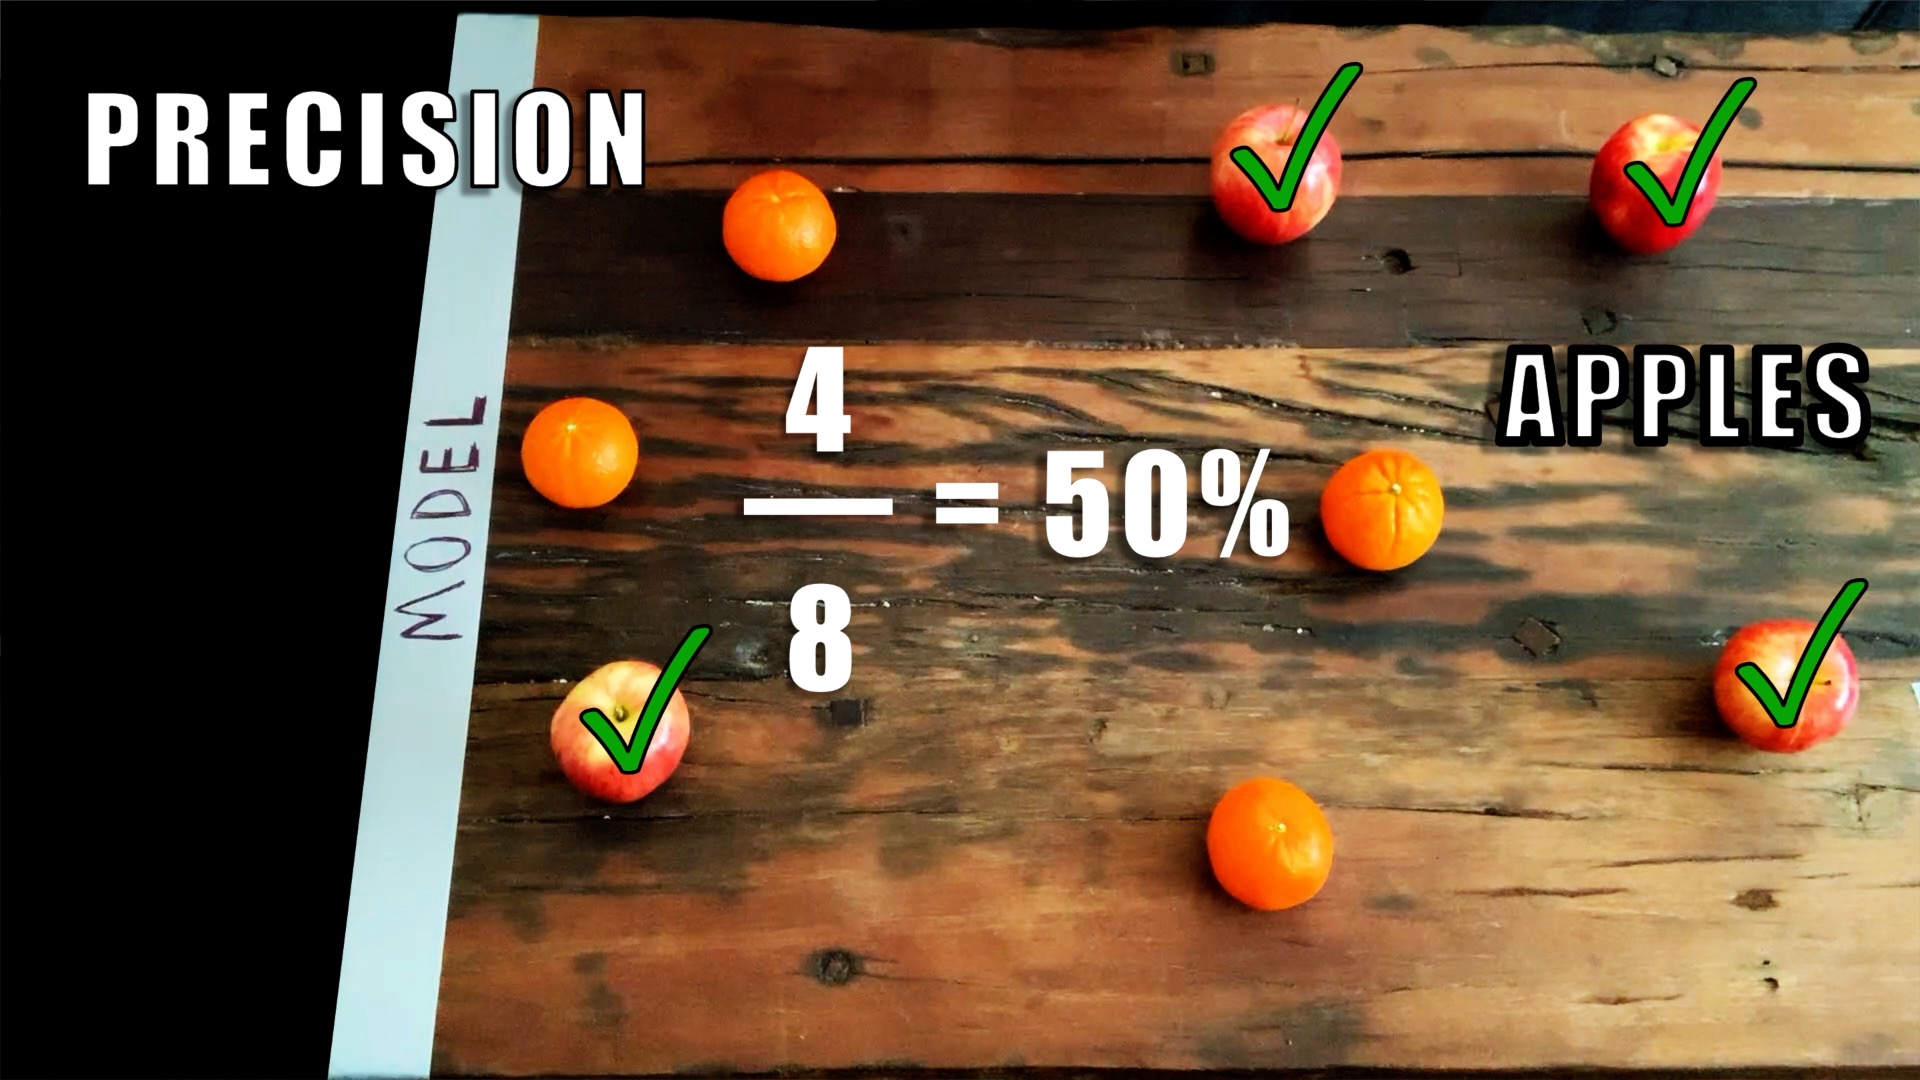 With the decision threshold decreased, precision decreased to 50% for the apple class